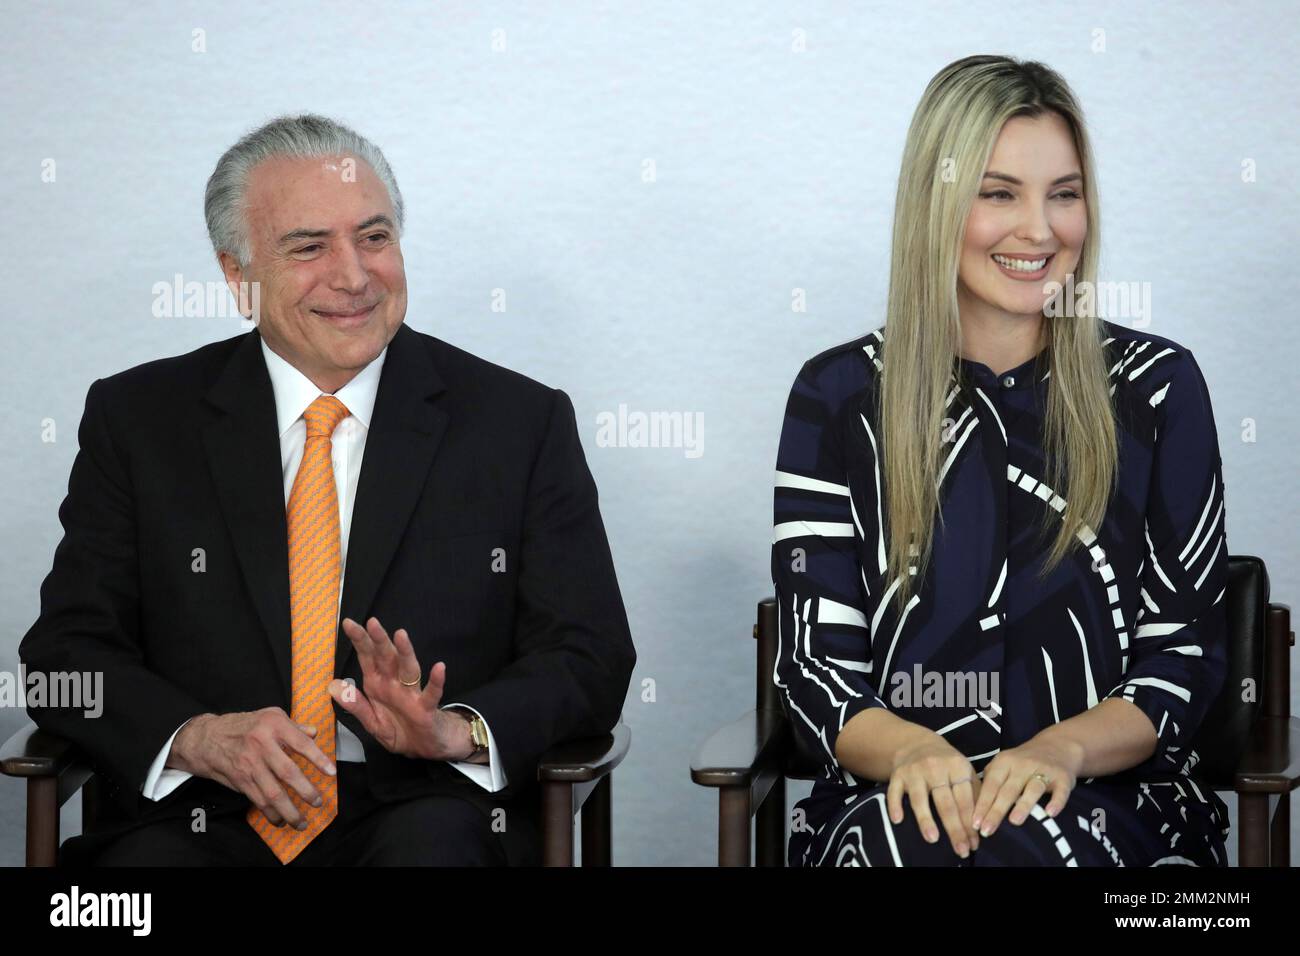 Brazil's President Michel Temer and his wife Marcela Temer, smile at a ceremony to launch the National Plan to Combat Domestic Violence against Women, at the Planalto Presidential Palace, in Brasilia, Brazil, Tuesday, Nov. 27, 2018. (AP Photo/Eraldo Peres) Stock Photo